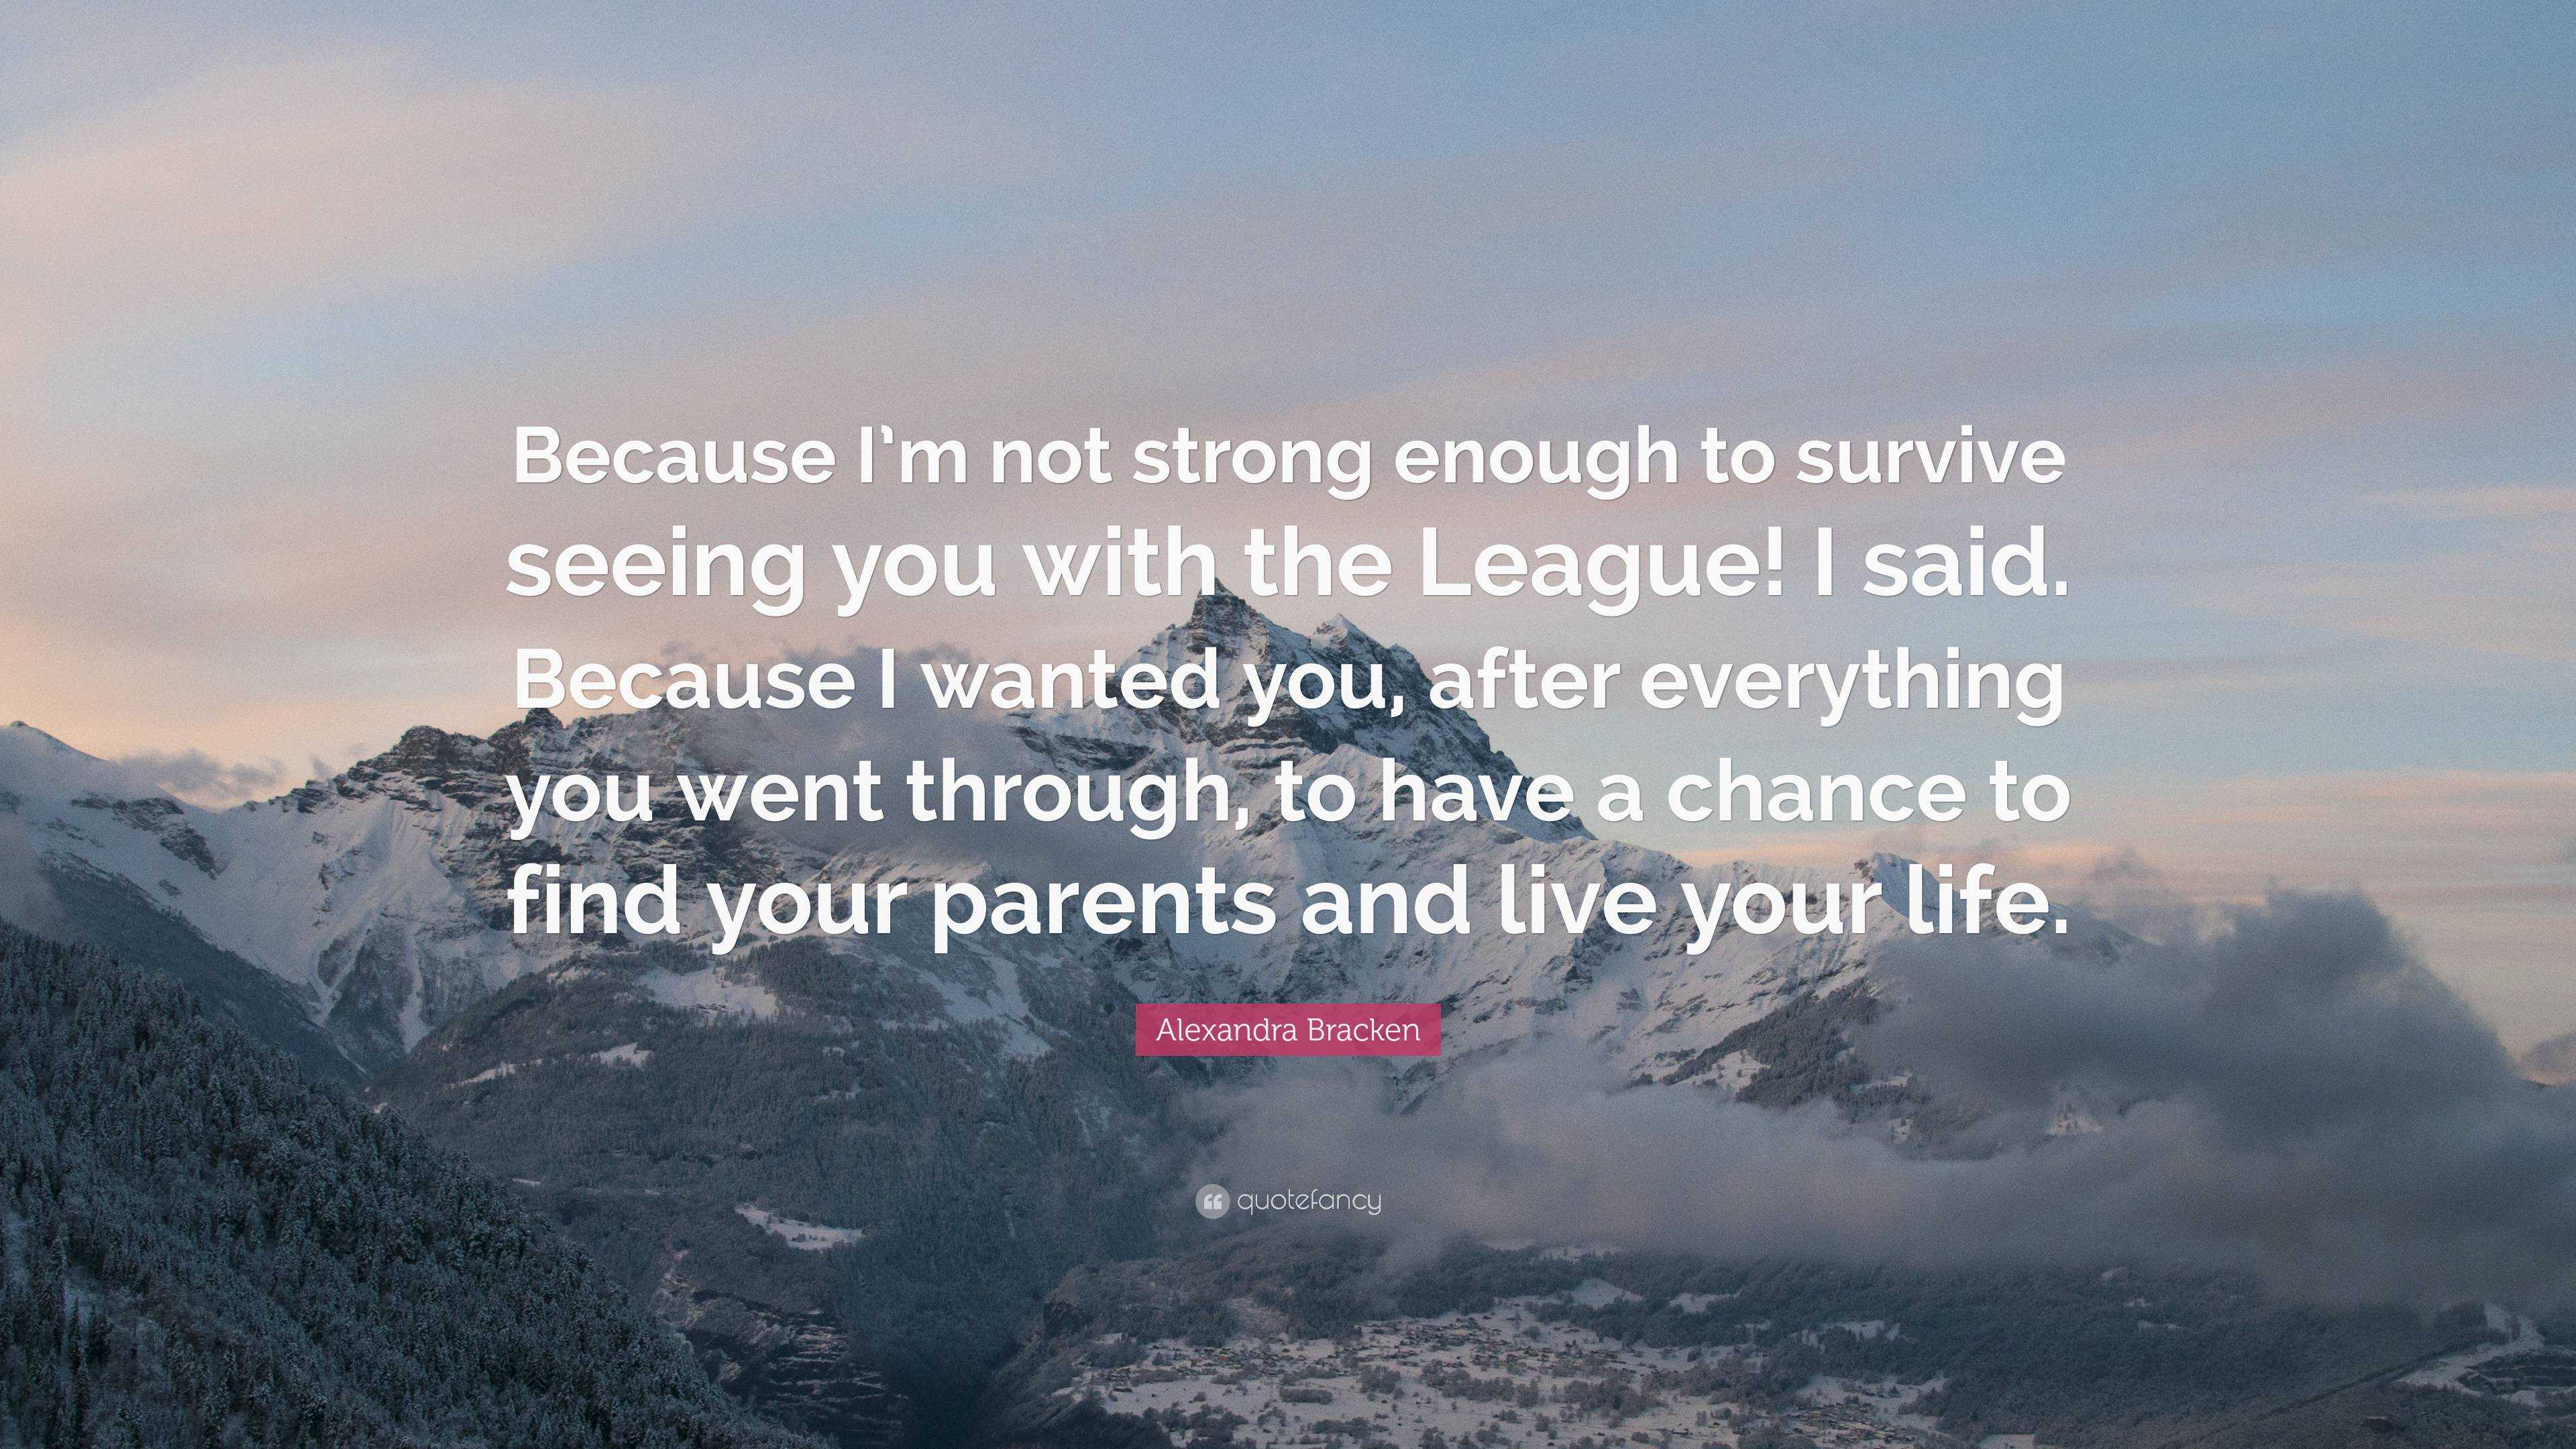 Alexandra Bracken Quote: “Because I’m not strong enough to survive ...